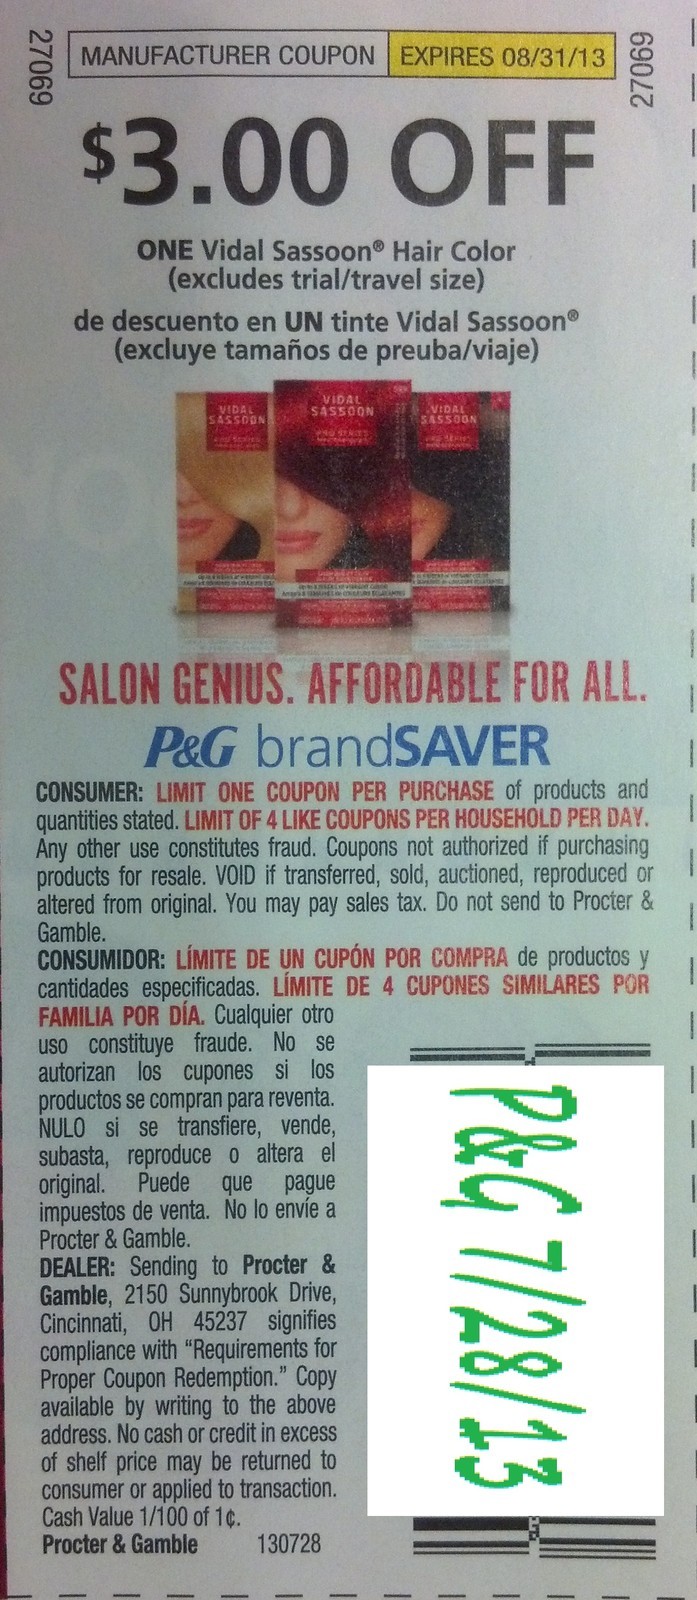 $3.00 off one Vidal Sassoon Hair Color (Excludes trial/travel size) Expires 08-31-2013